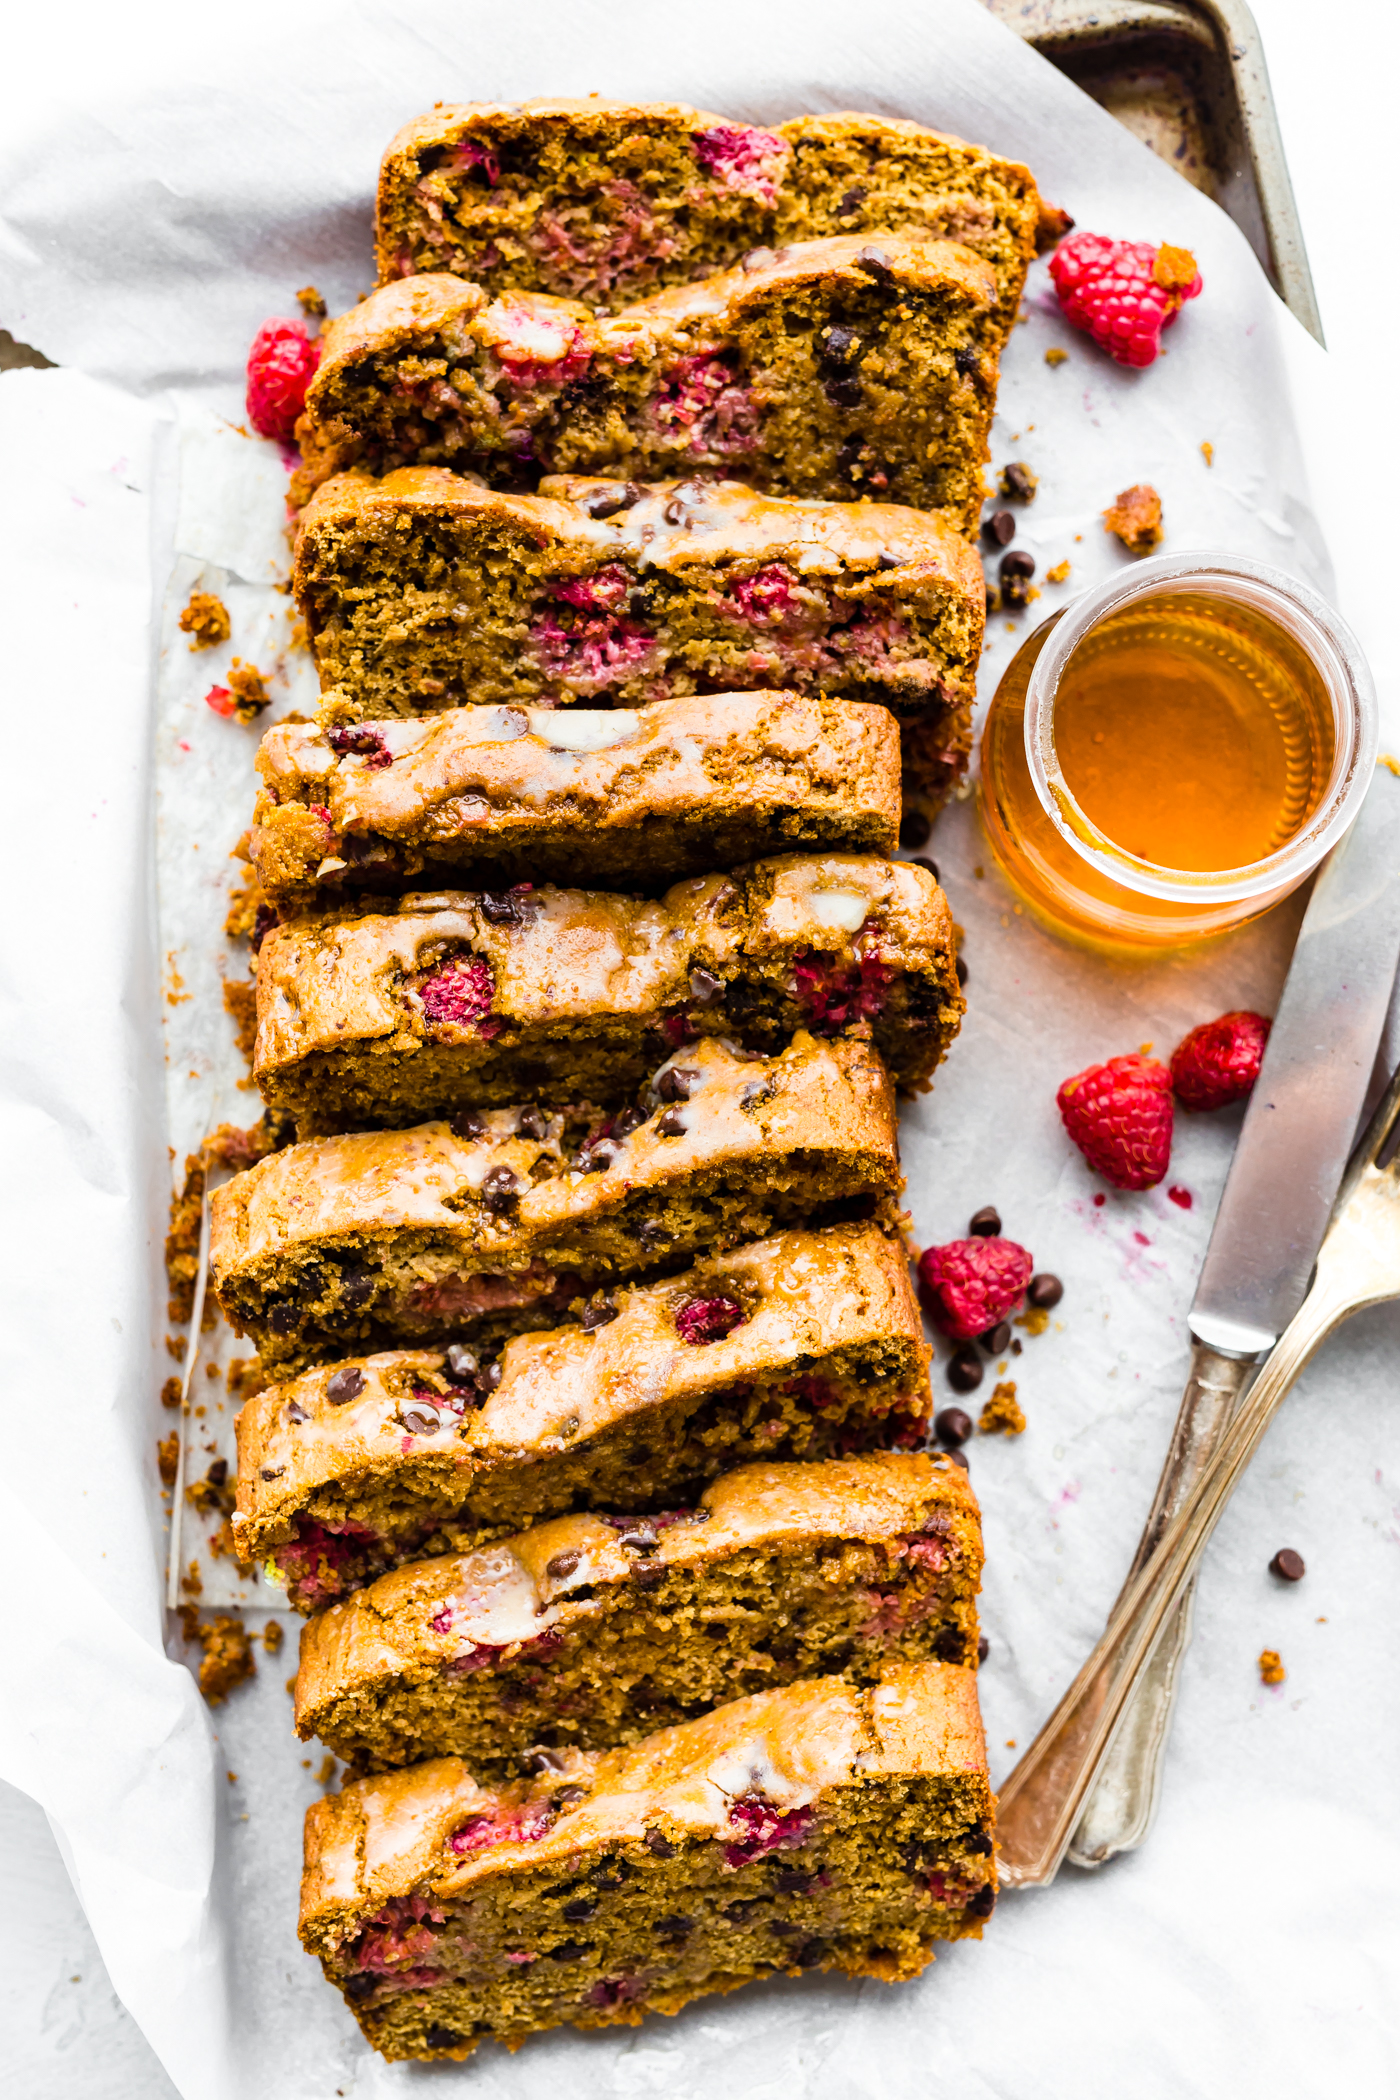 A Gluten Free Chocolate Raspberry Pancake Bread recipe that's great for brunch or breakfast. It's simple to make with wholesome ingredients. An allergy friendly and vegan friendly "quick" pancake bread recipe with the just the right fruit and chocolate combo. Freezer friendly too!